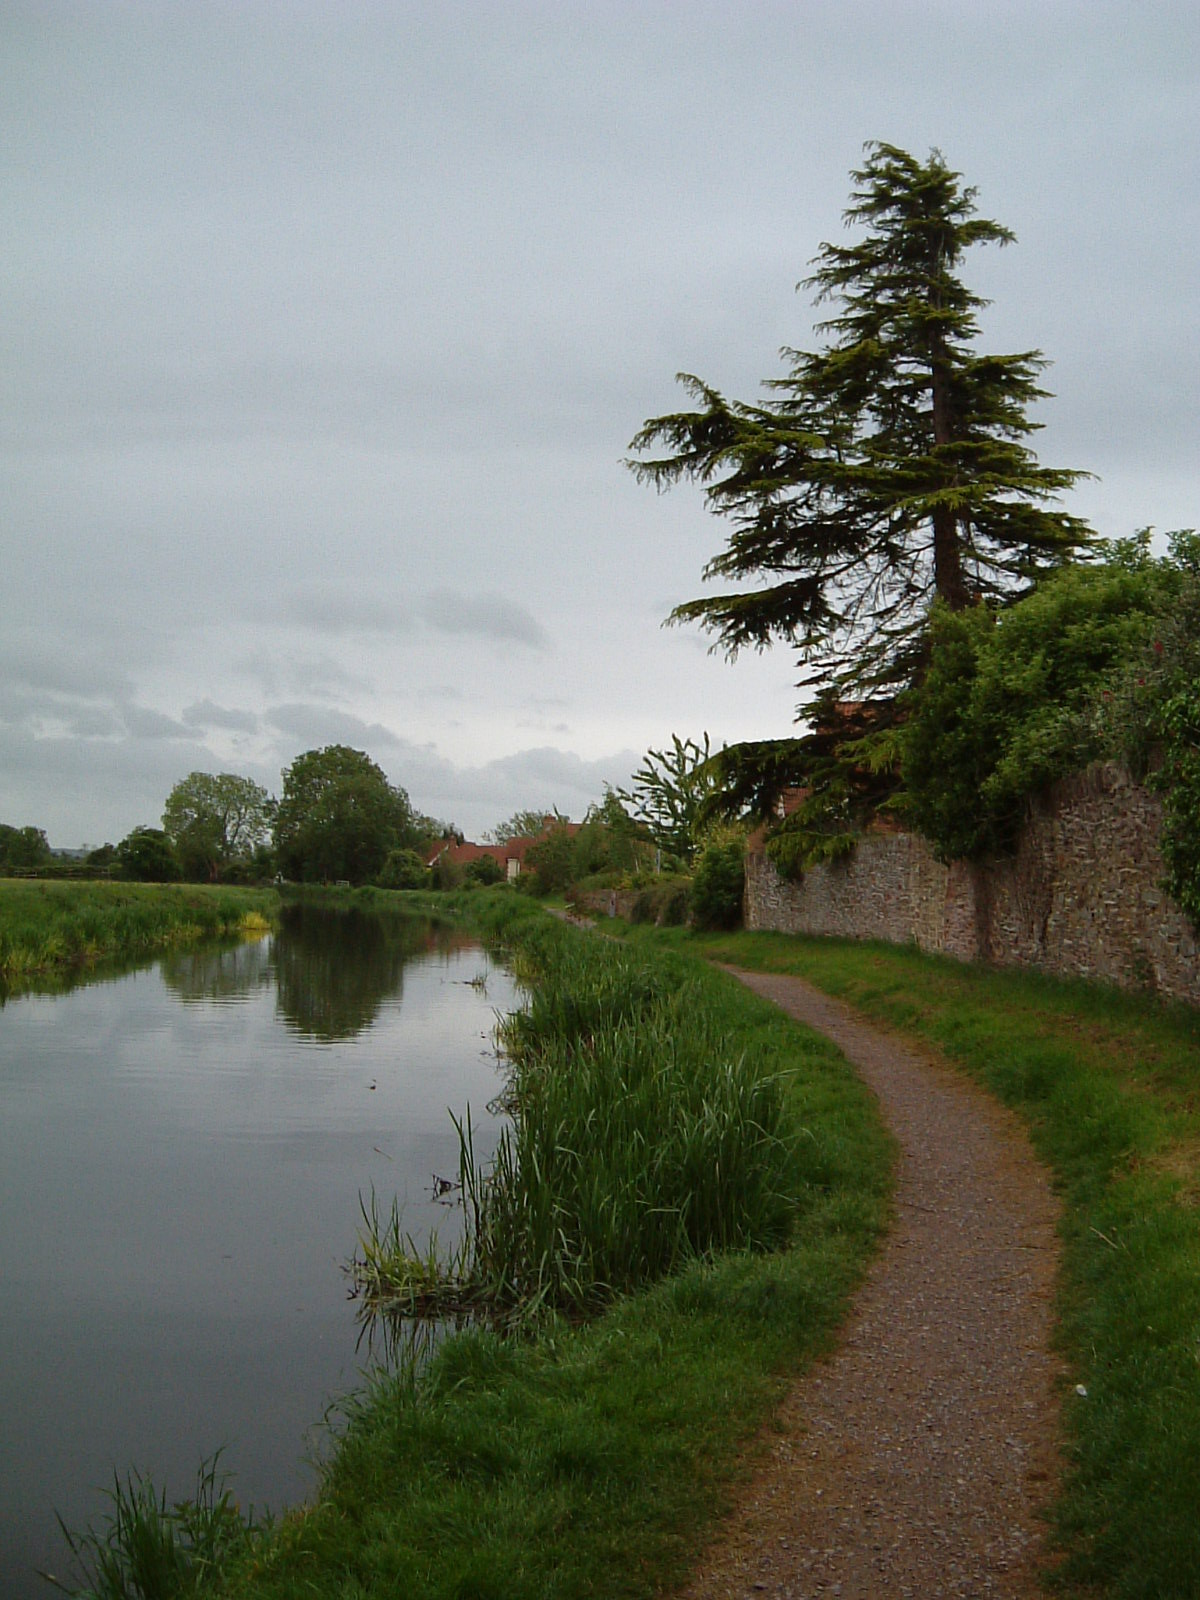 The Bridgwater and Taunton Canal